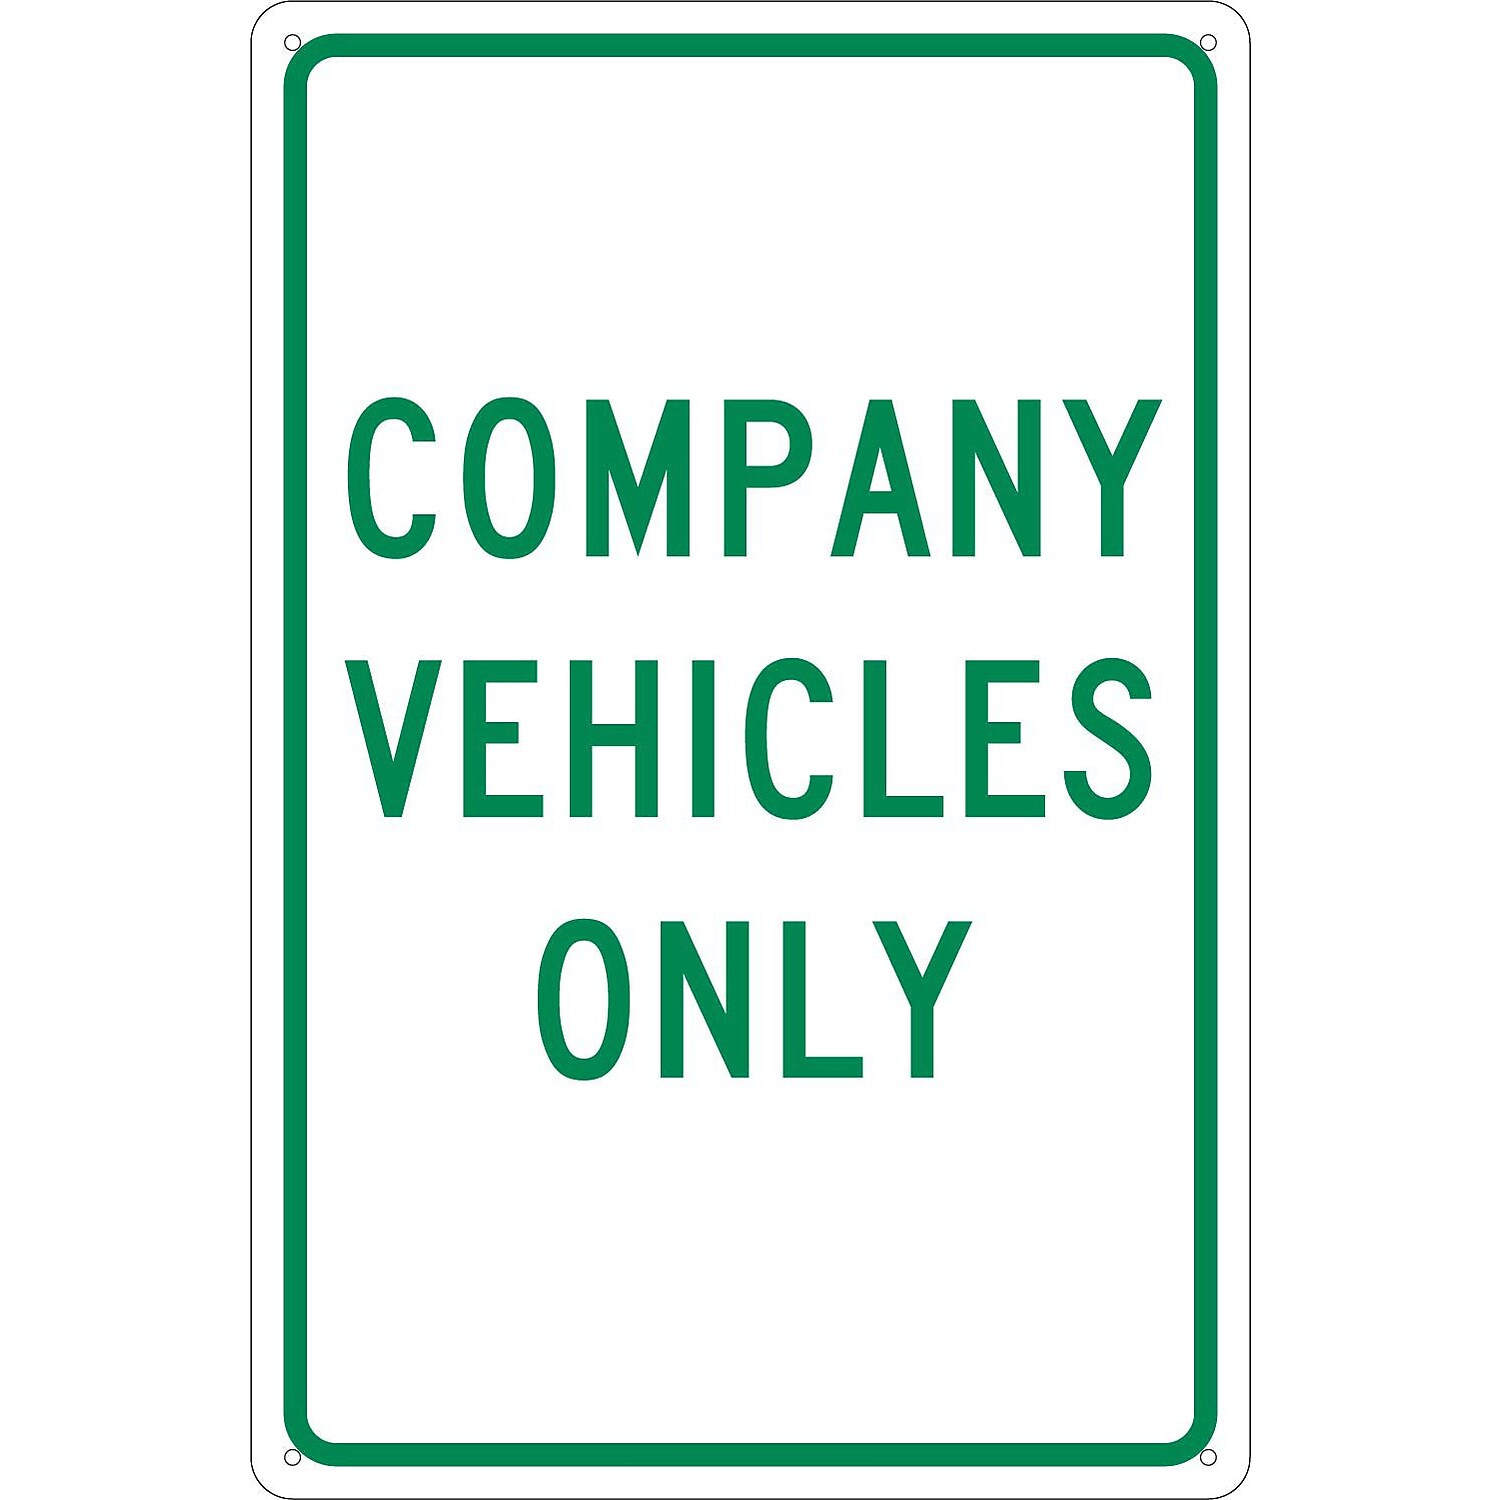 National Marker Parking Signs; Company Vehicles Only 18X12 .040 Aluminum TM138G - image 1 of 1